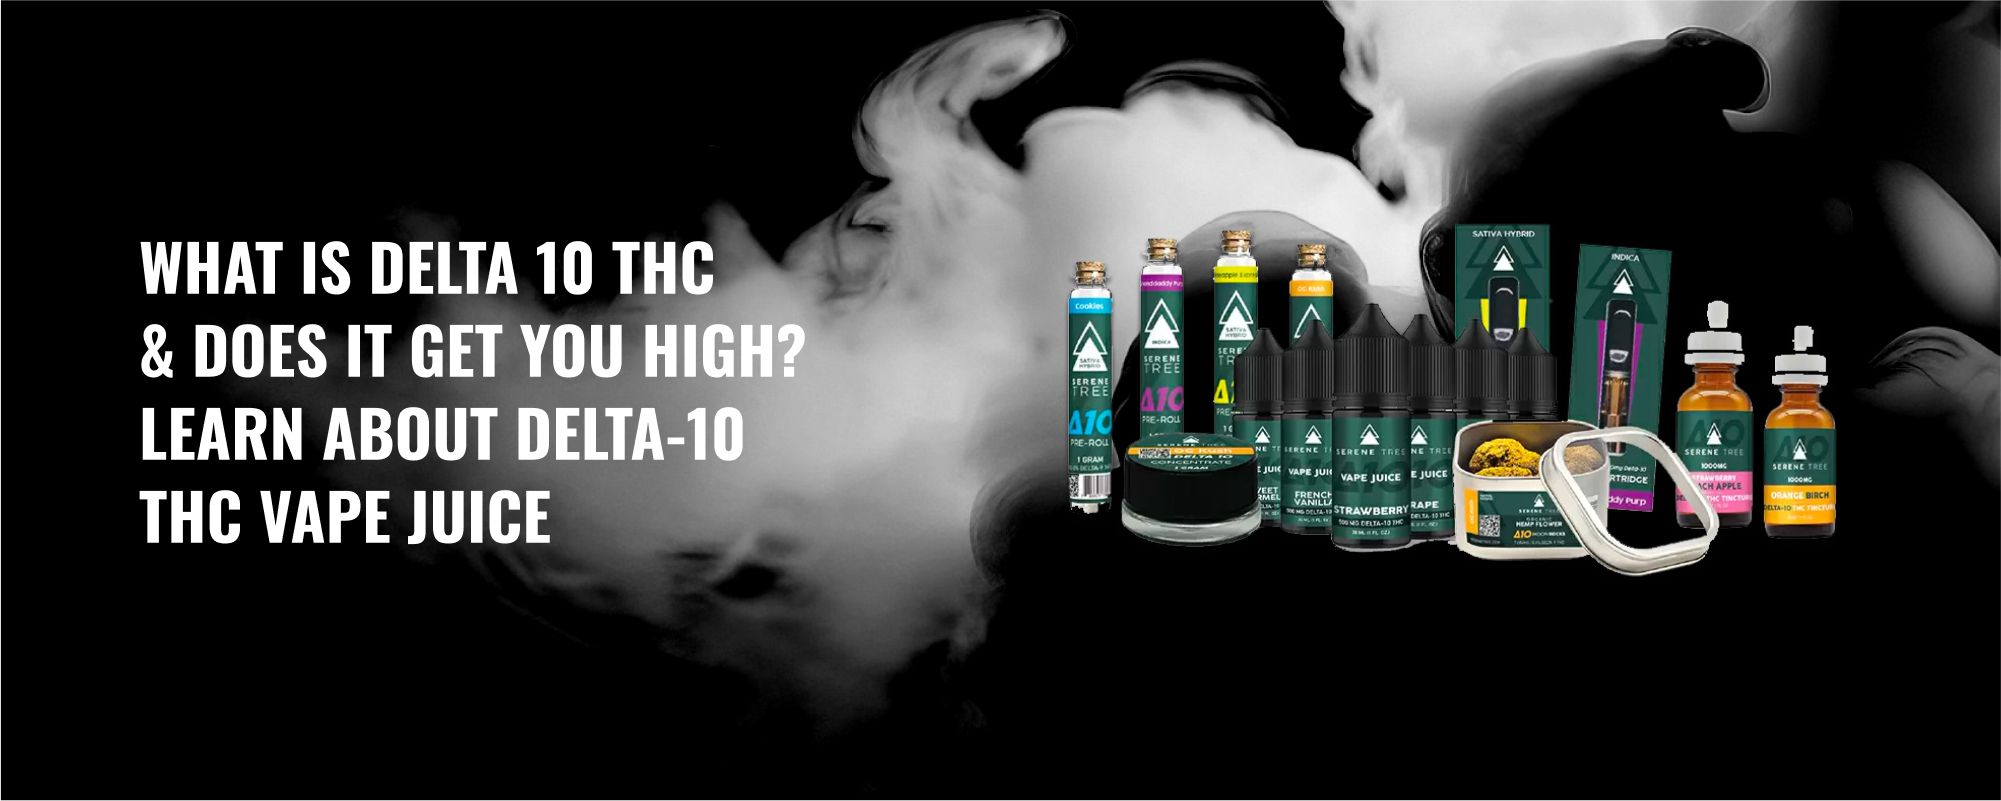 What Is Delta-10 THC & Does it Get You High? Learn About Delta-10 THC Vape Juice